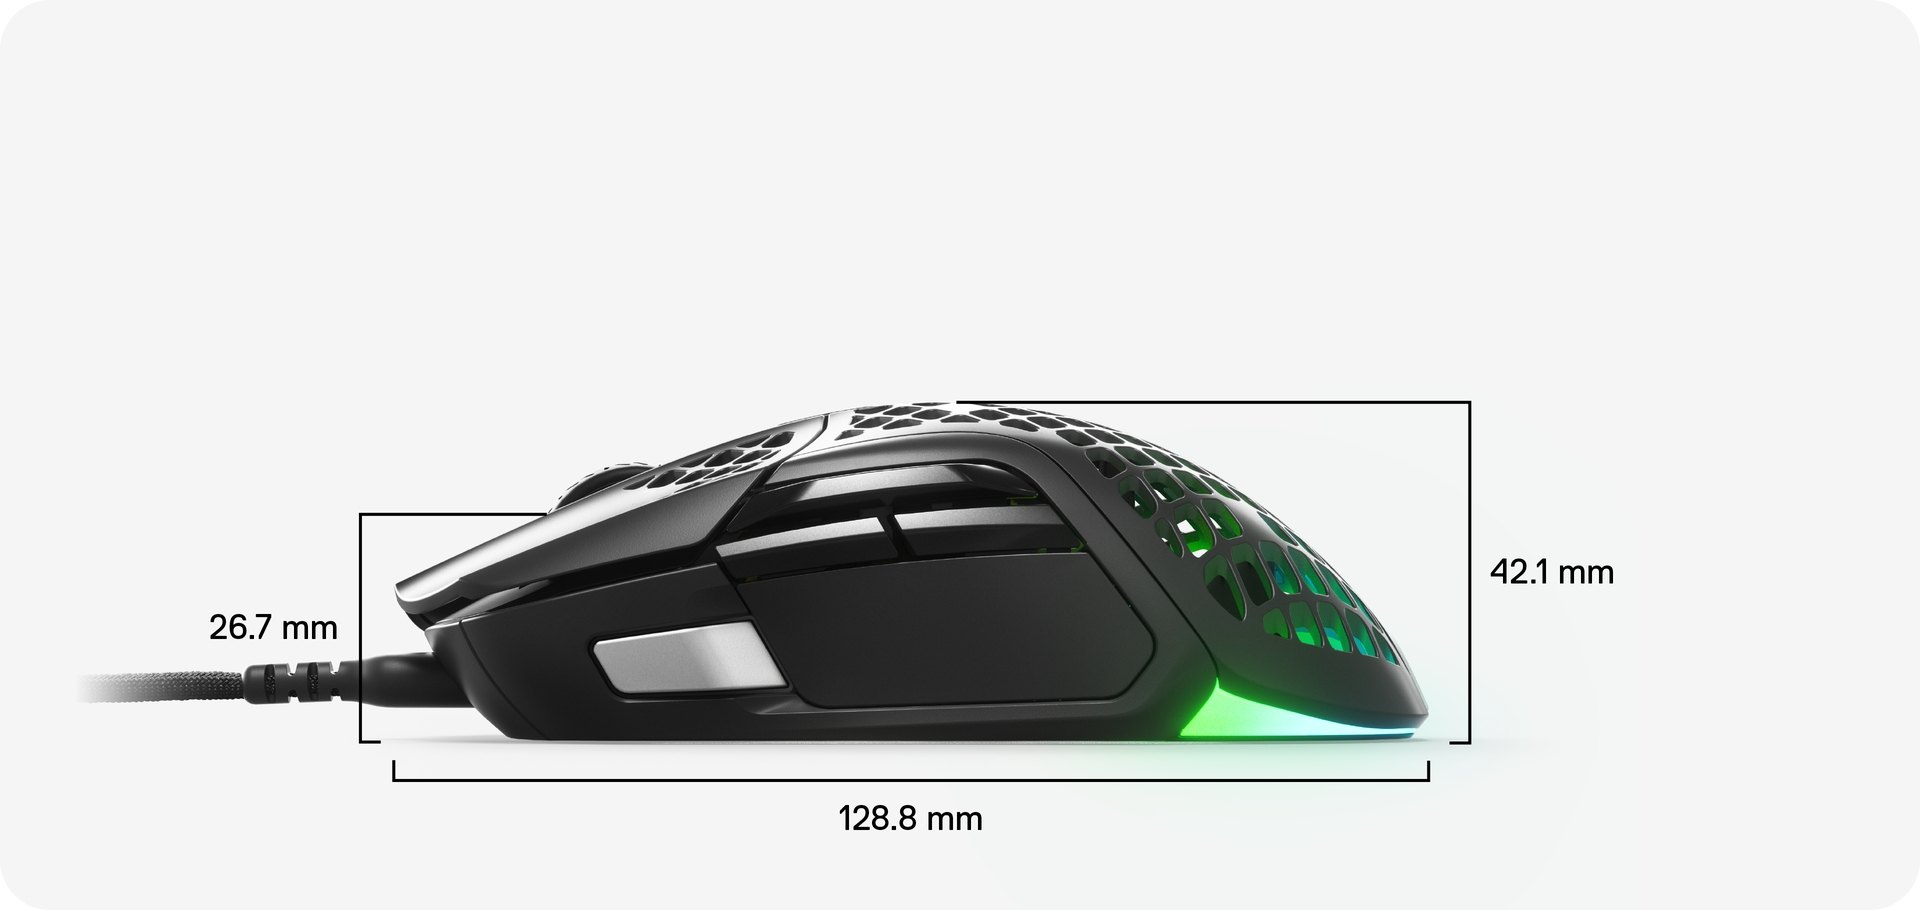 Side view with dimensions for the Aerox 5 mouse: 42.1 MM from palm rest to base, 26.7 MM from scroll wheel to base, and 128.8 MM in total length.